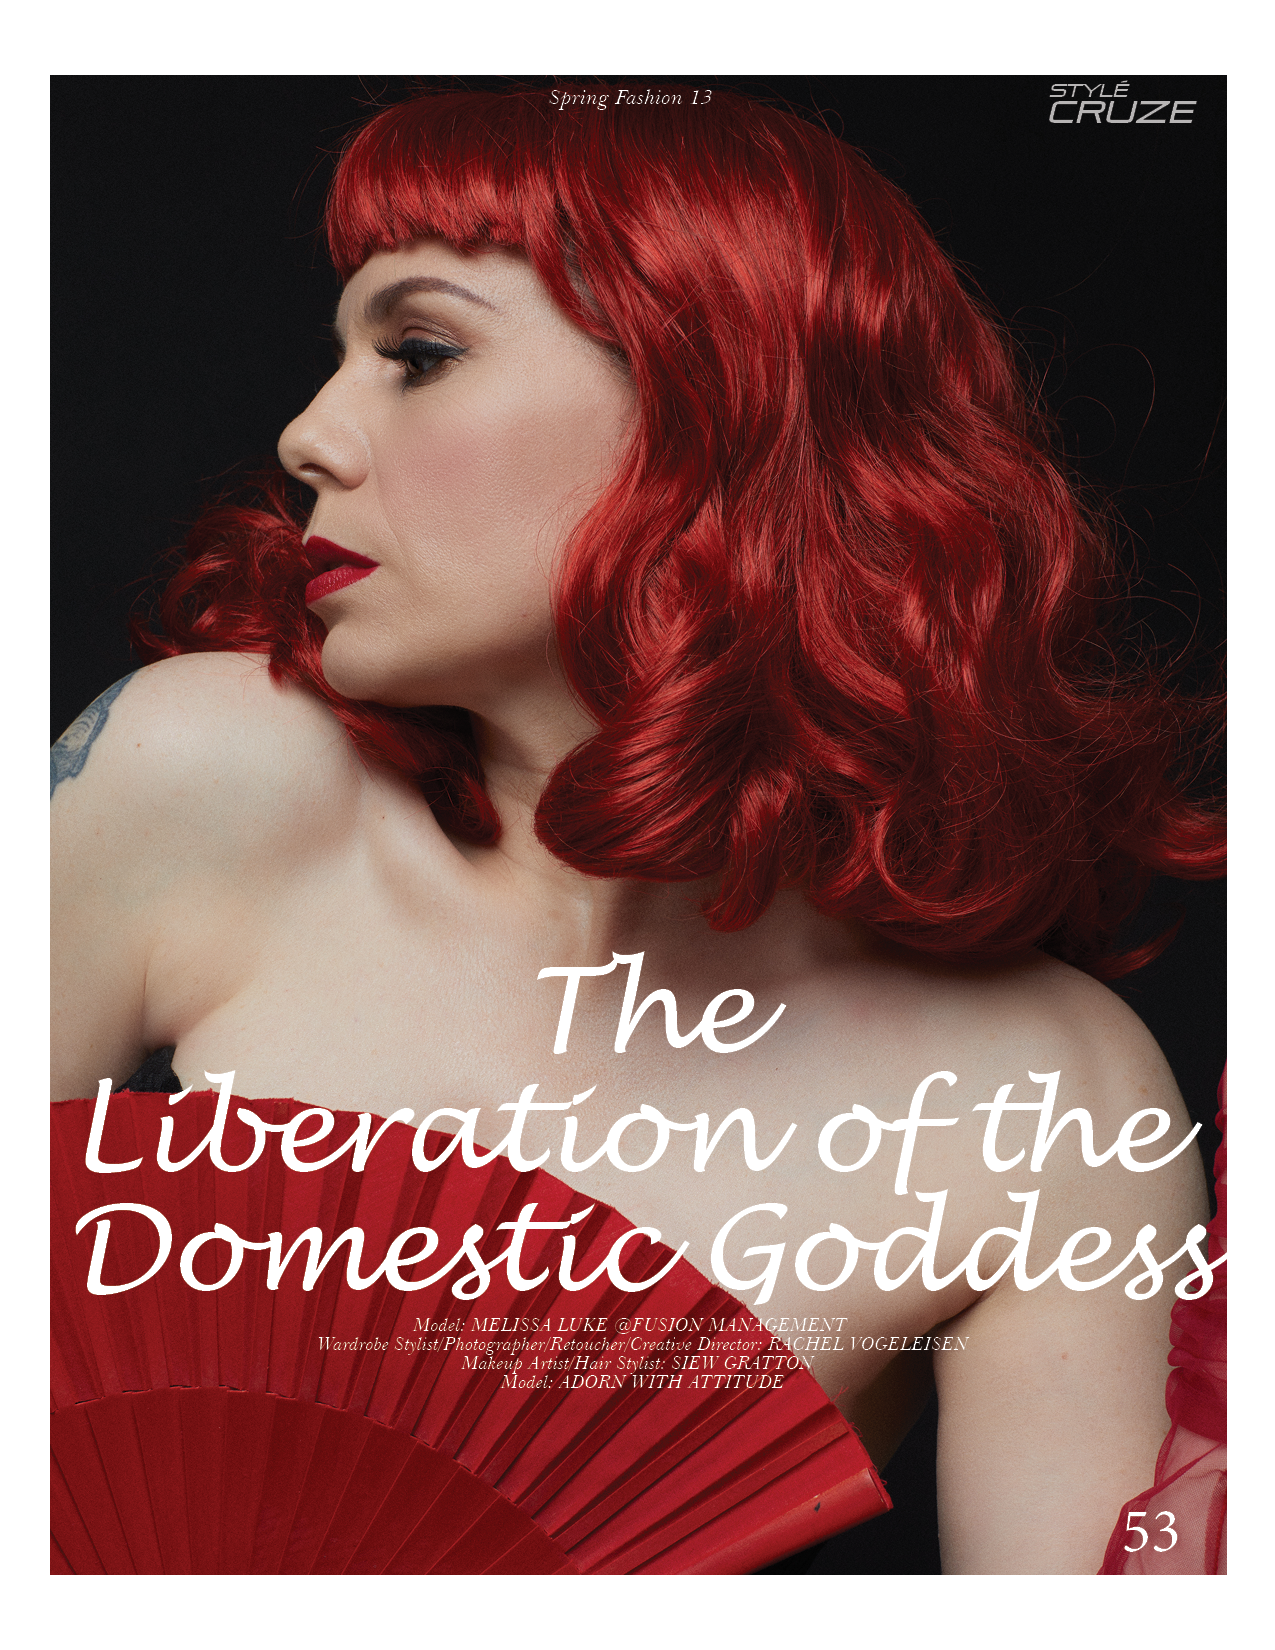 The liberation of the domestic goddess feature published in the StyleCruze magazine